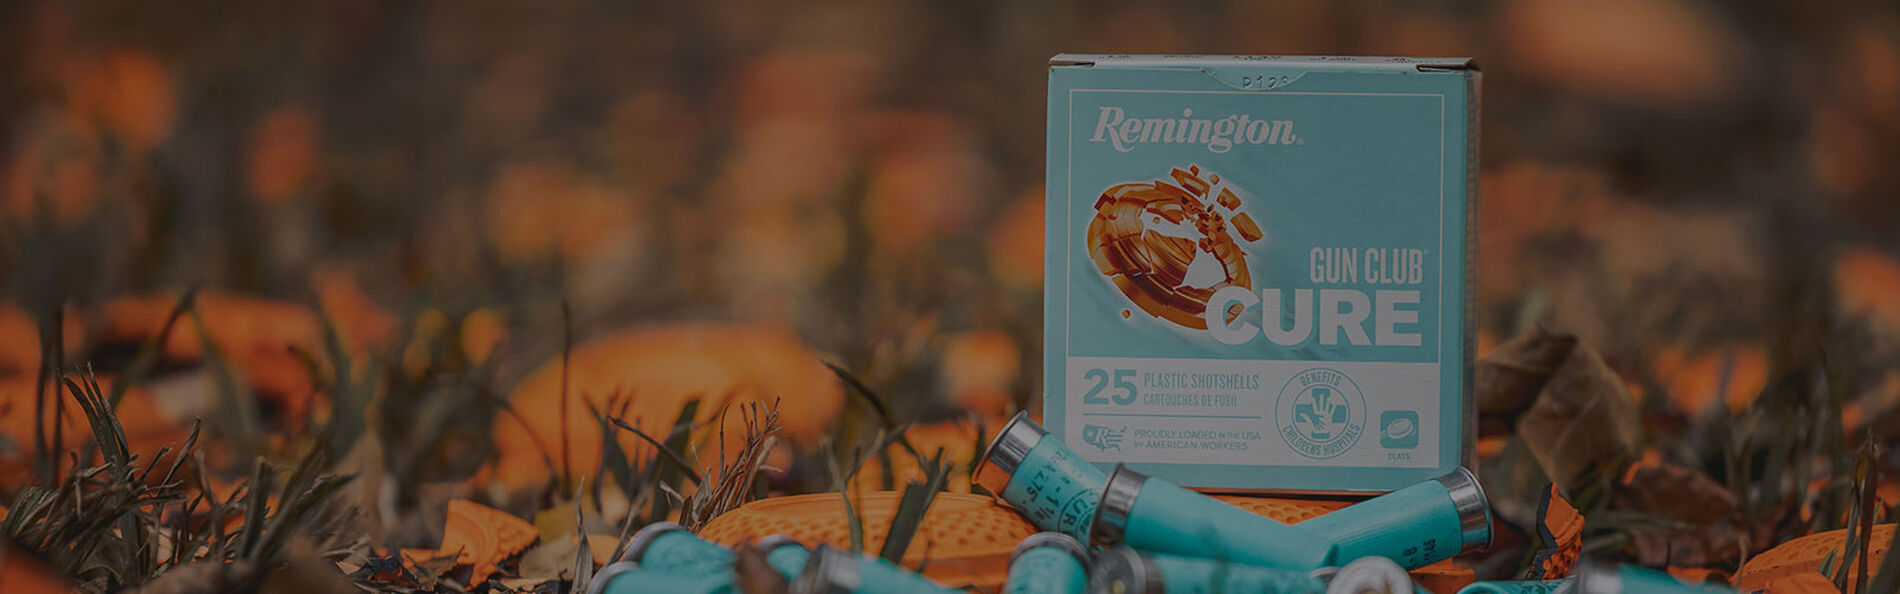 Remington Gun Club Cure box and shotshell sitting in the grass with broken clays